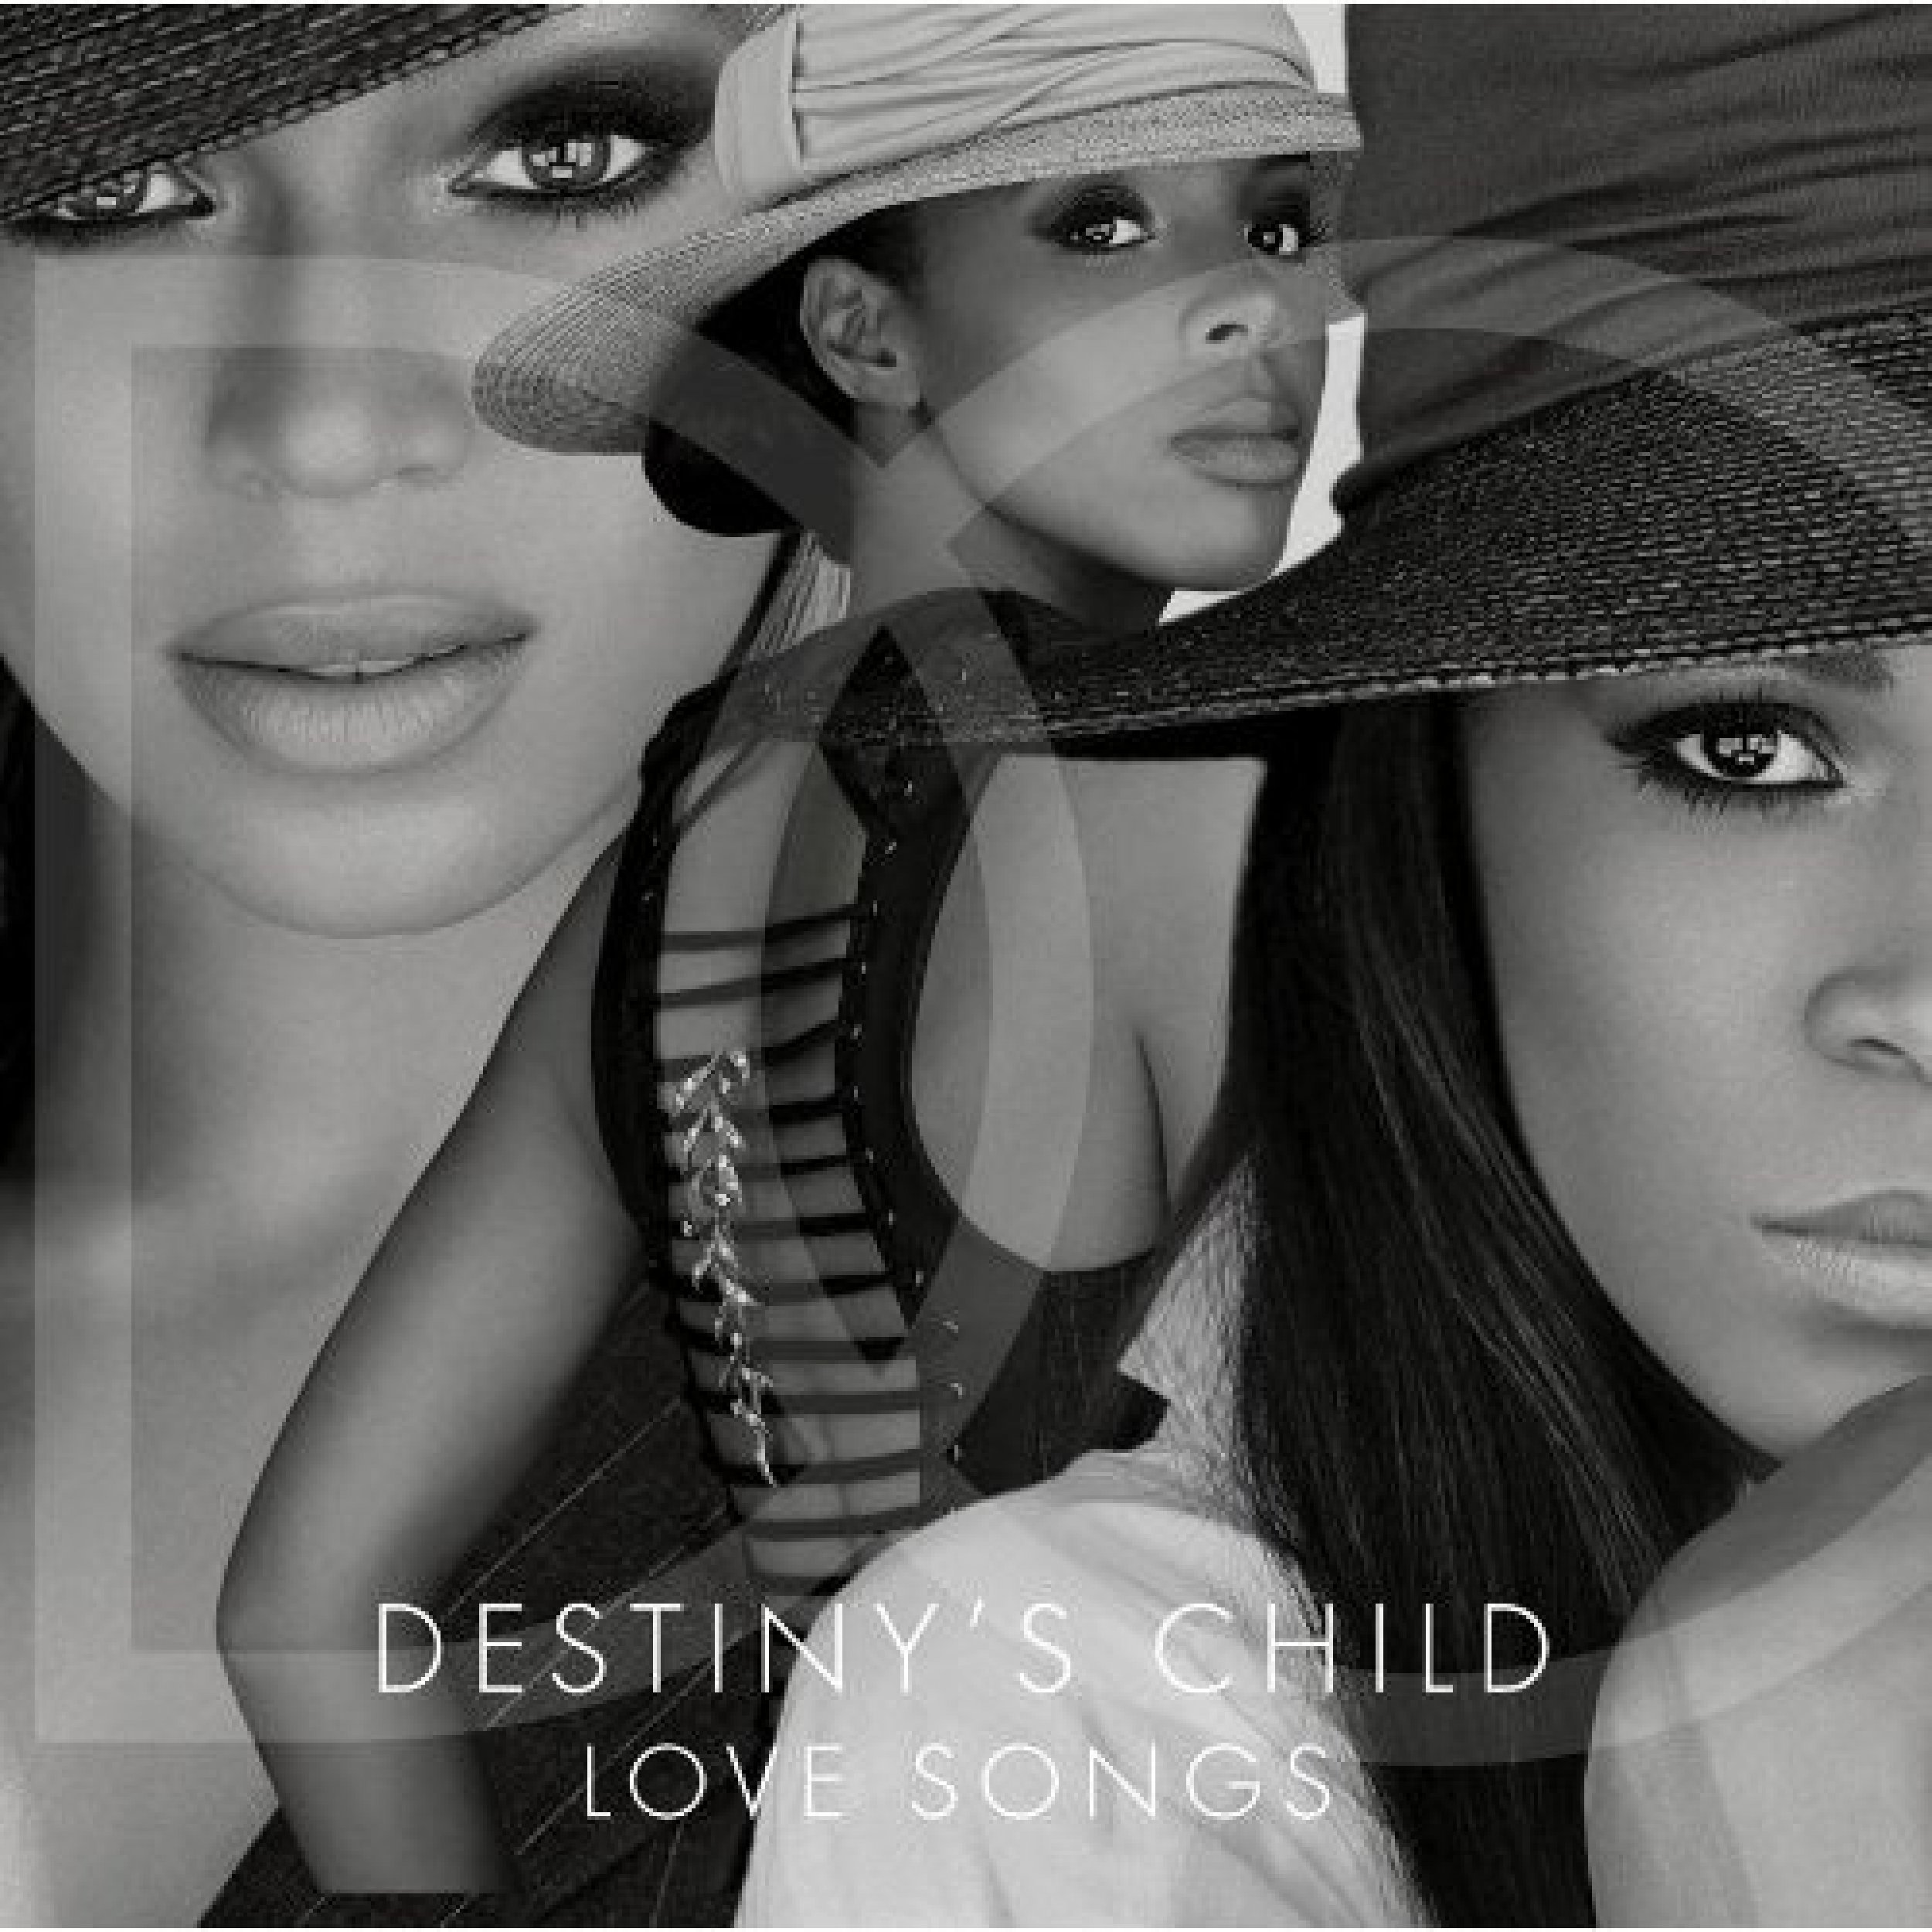 A Look At Destinys Child Over The Years